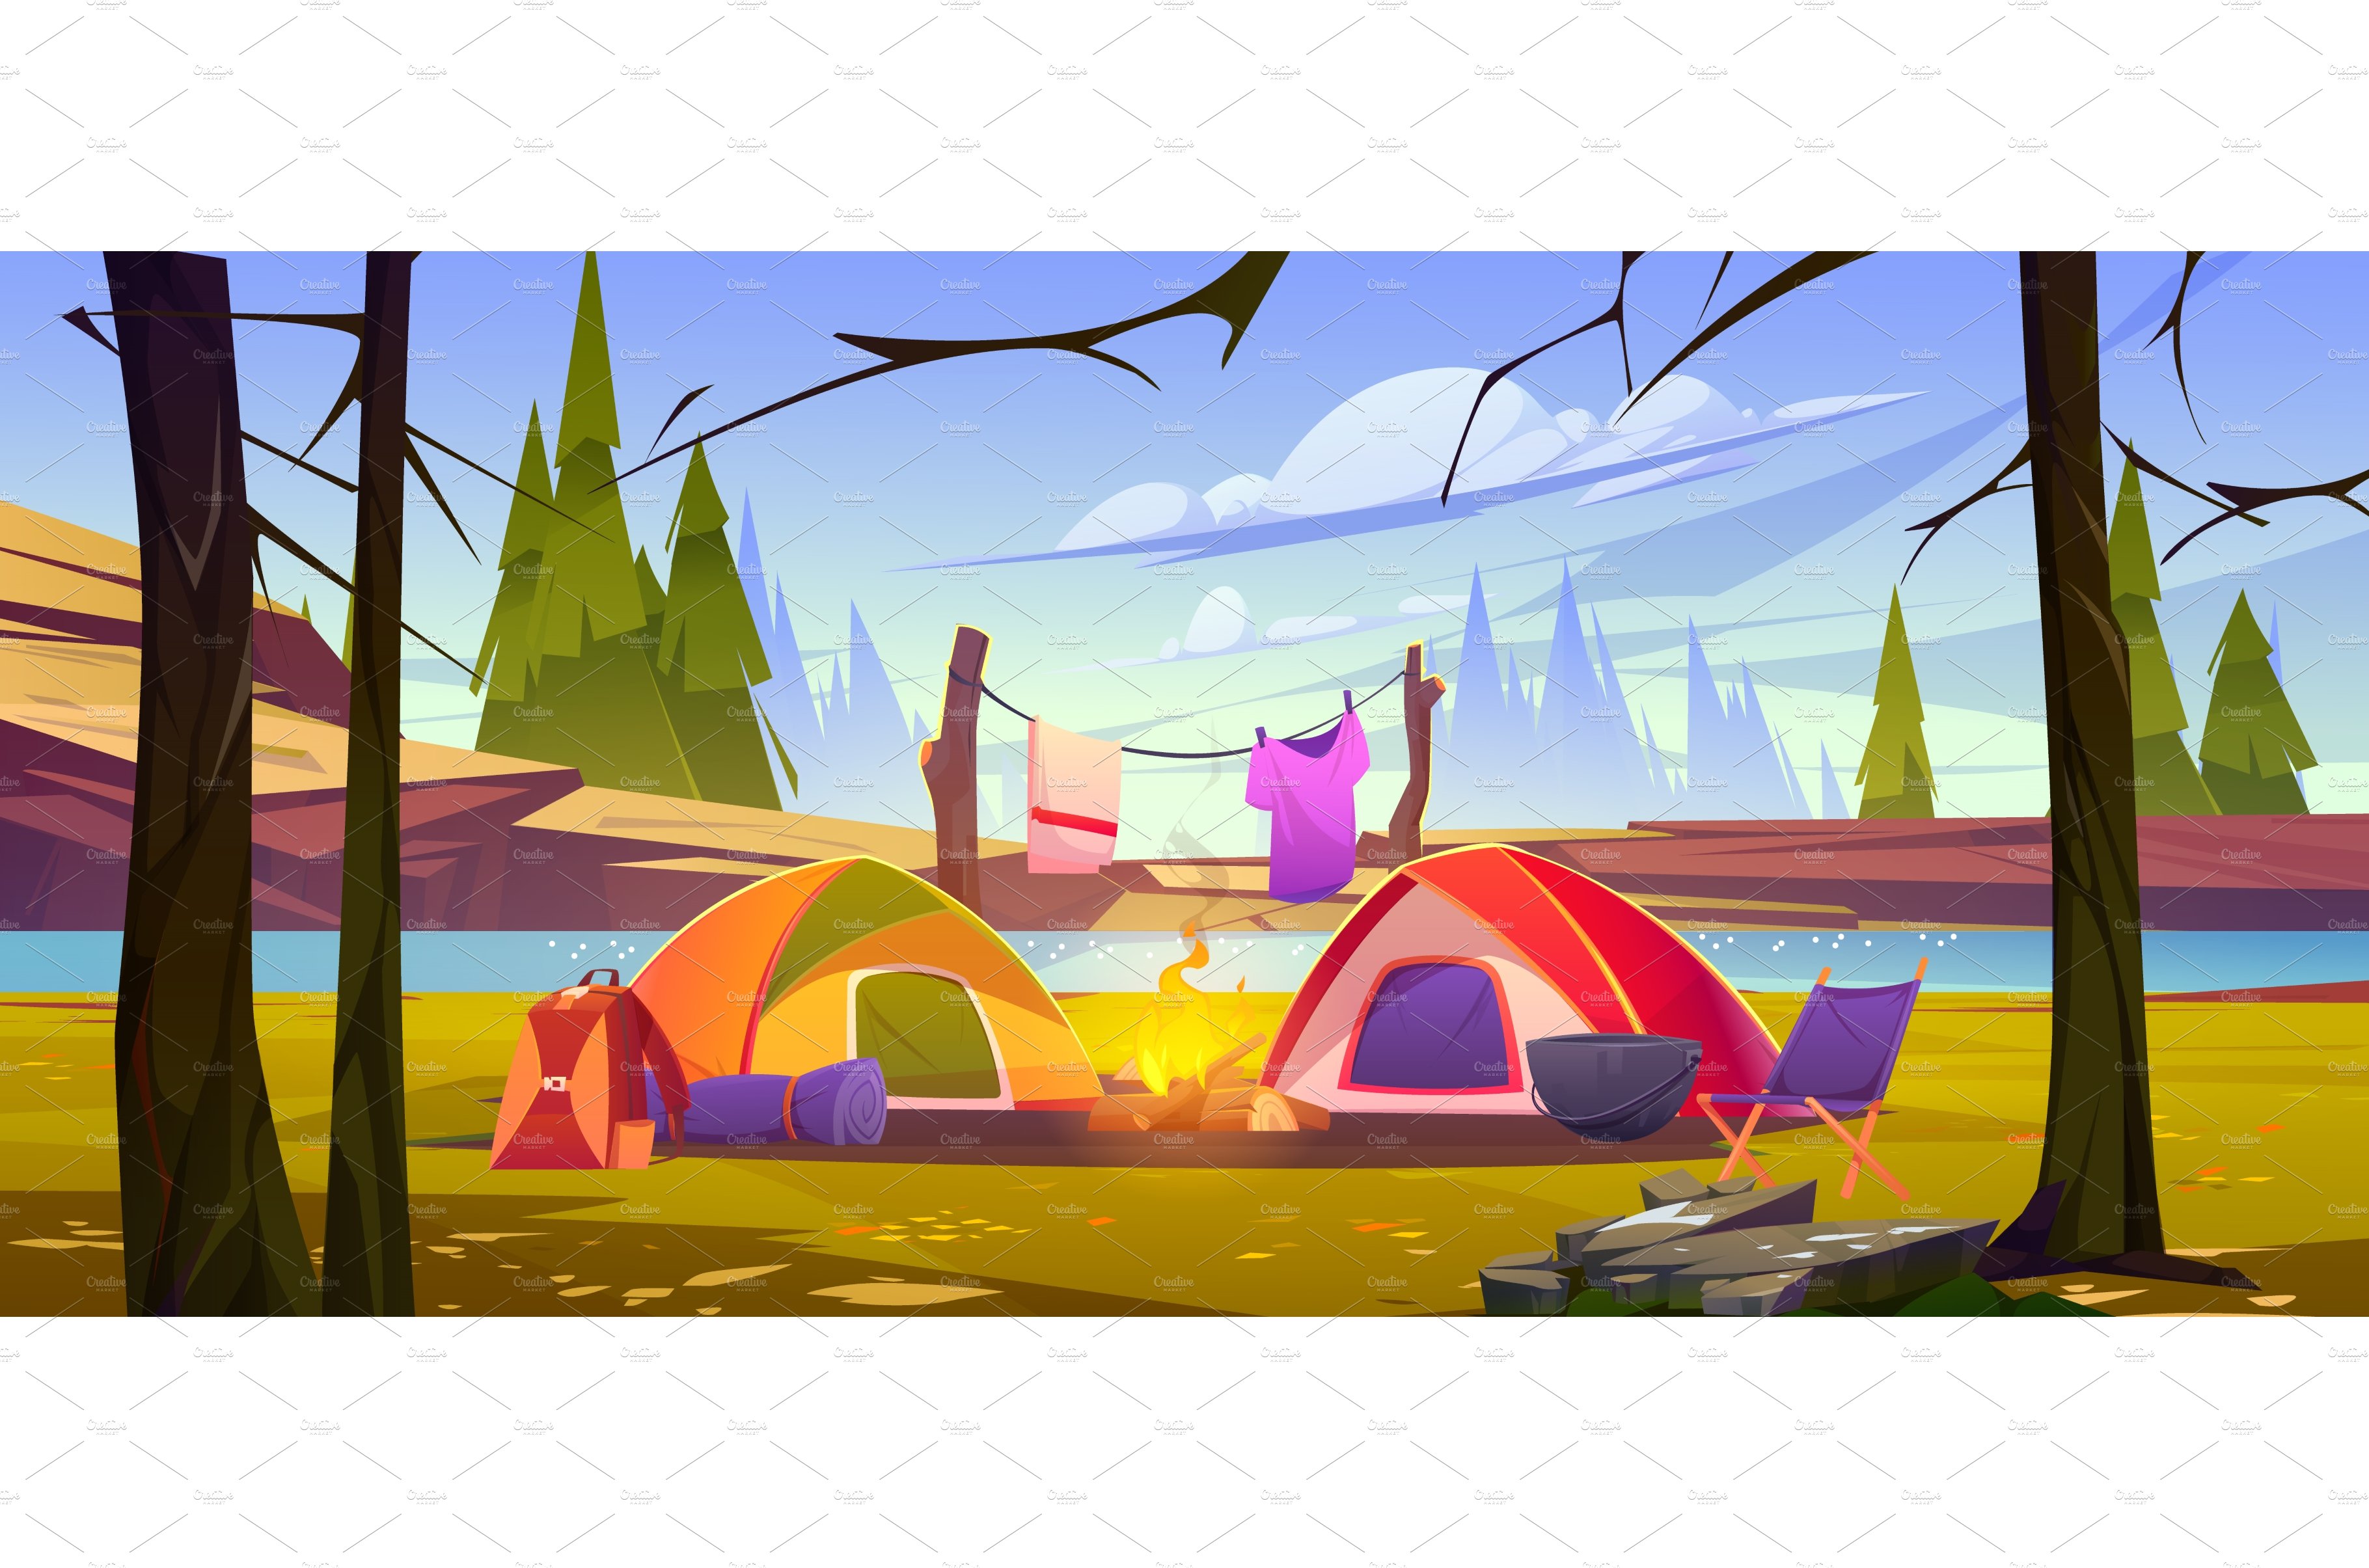 Camping tents with campfire in cover image.